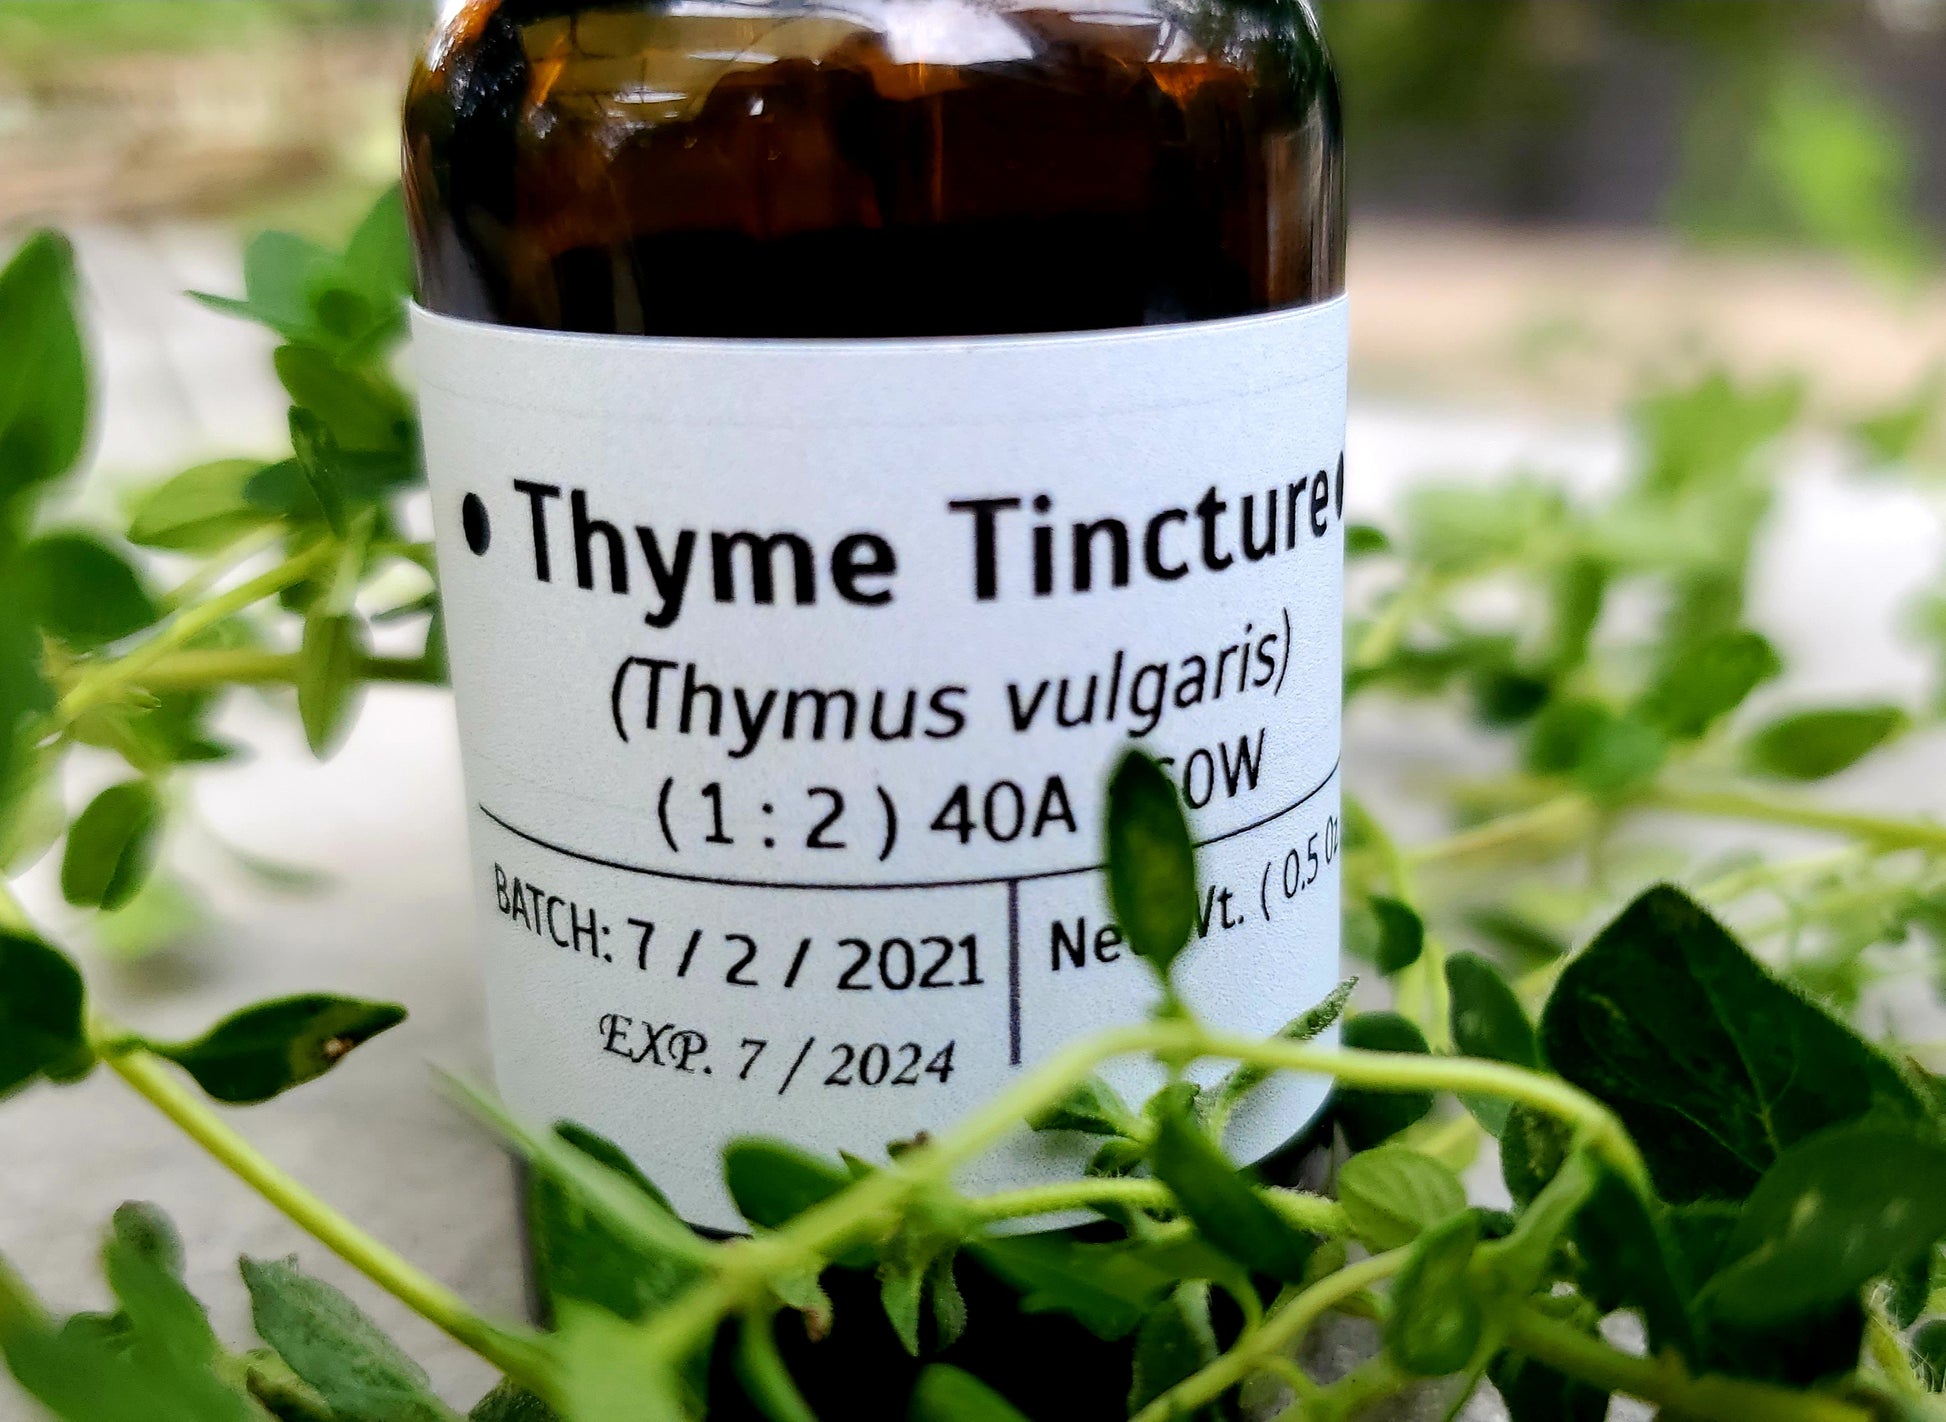 Where Can I Buy Thyme Tincture